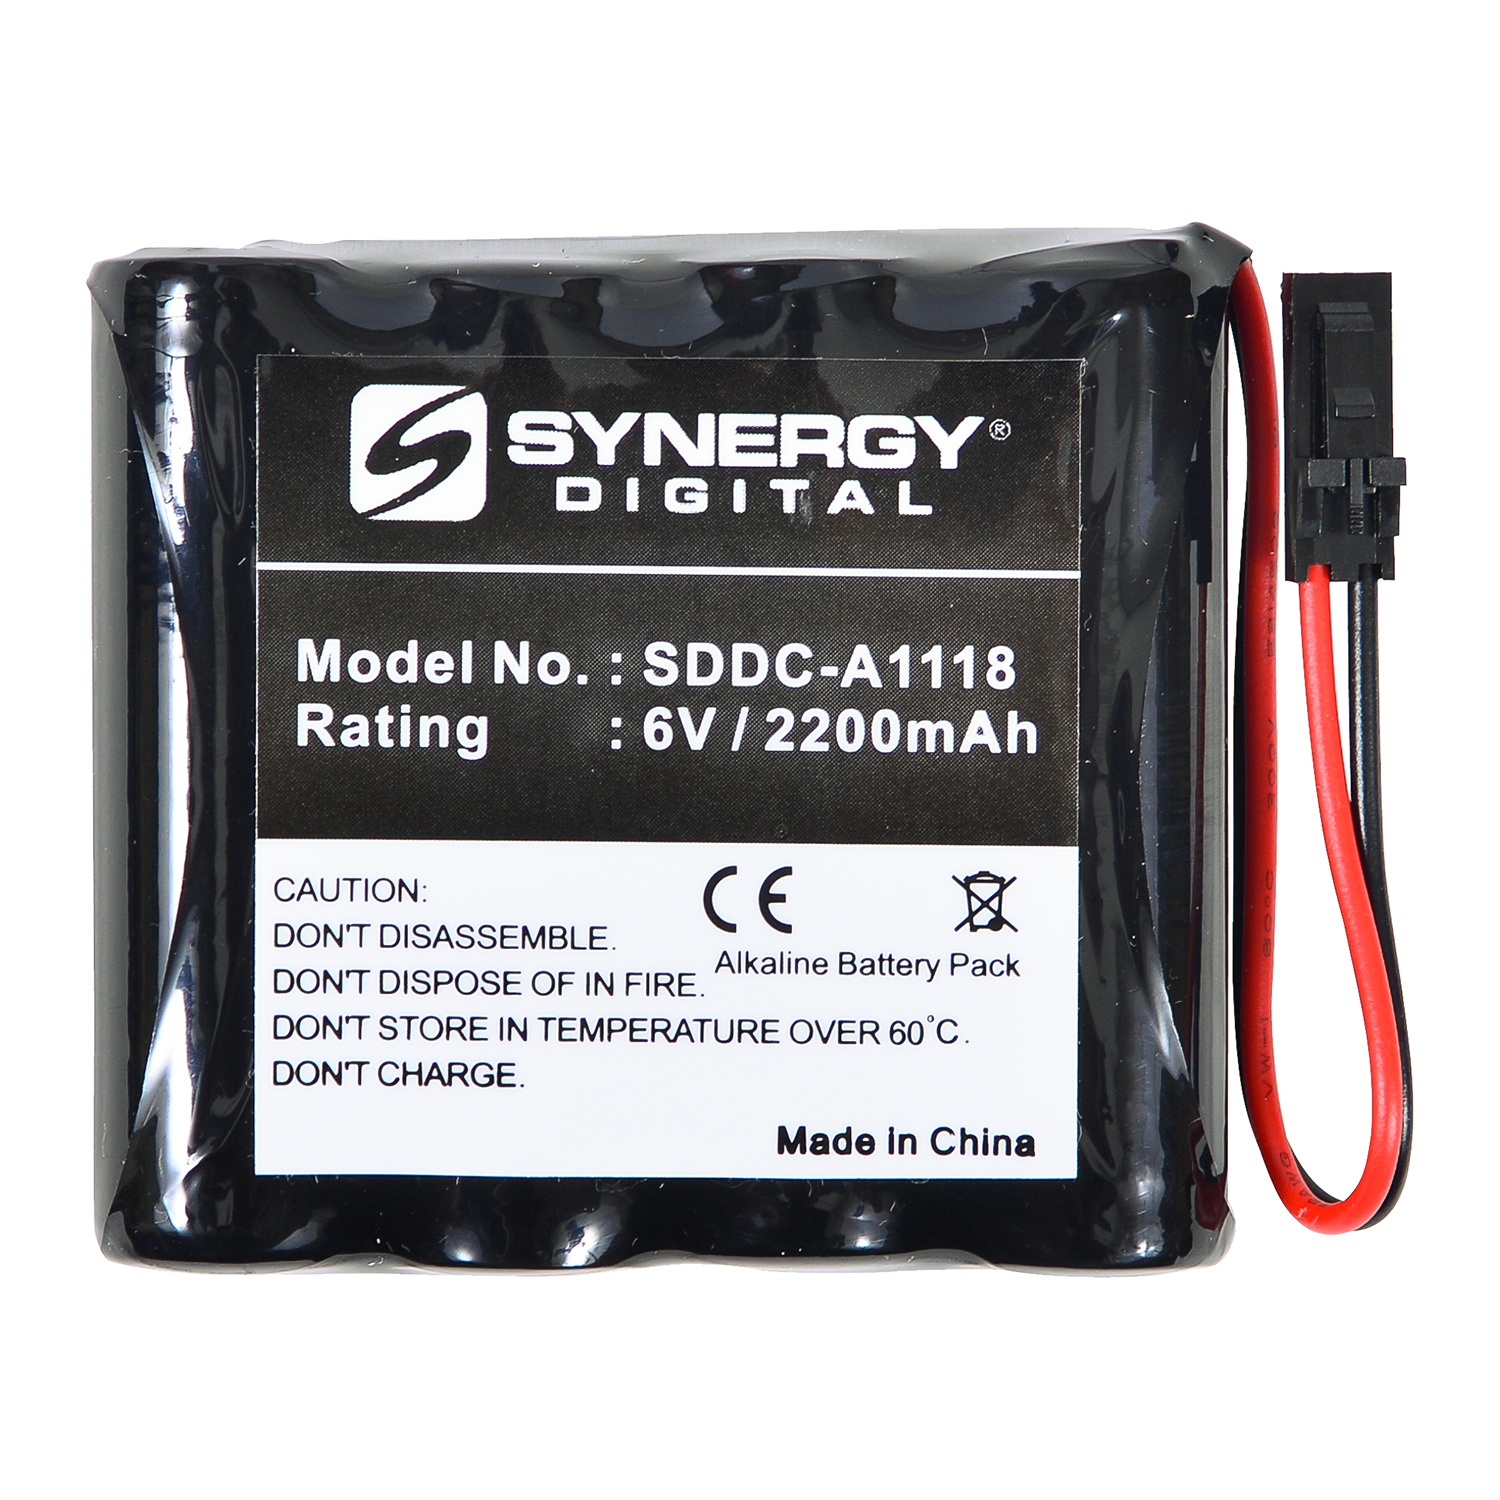 DL-3 Ultra High Capacity (Alkaline, 6V, 2200 mAh) Battery - Replacement for Best Access Systems VPD-BB Door Lock Battery